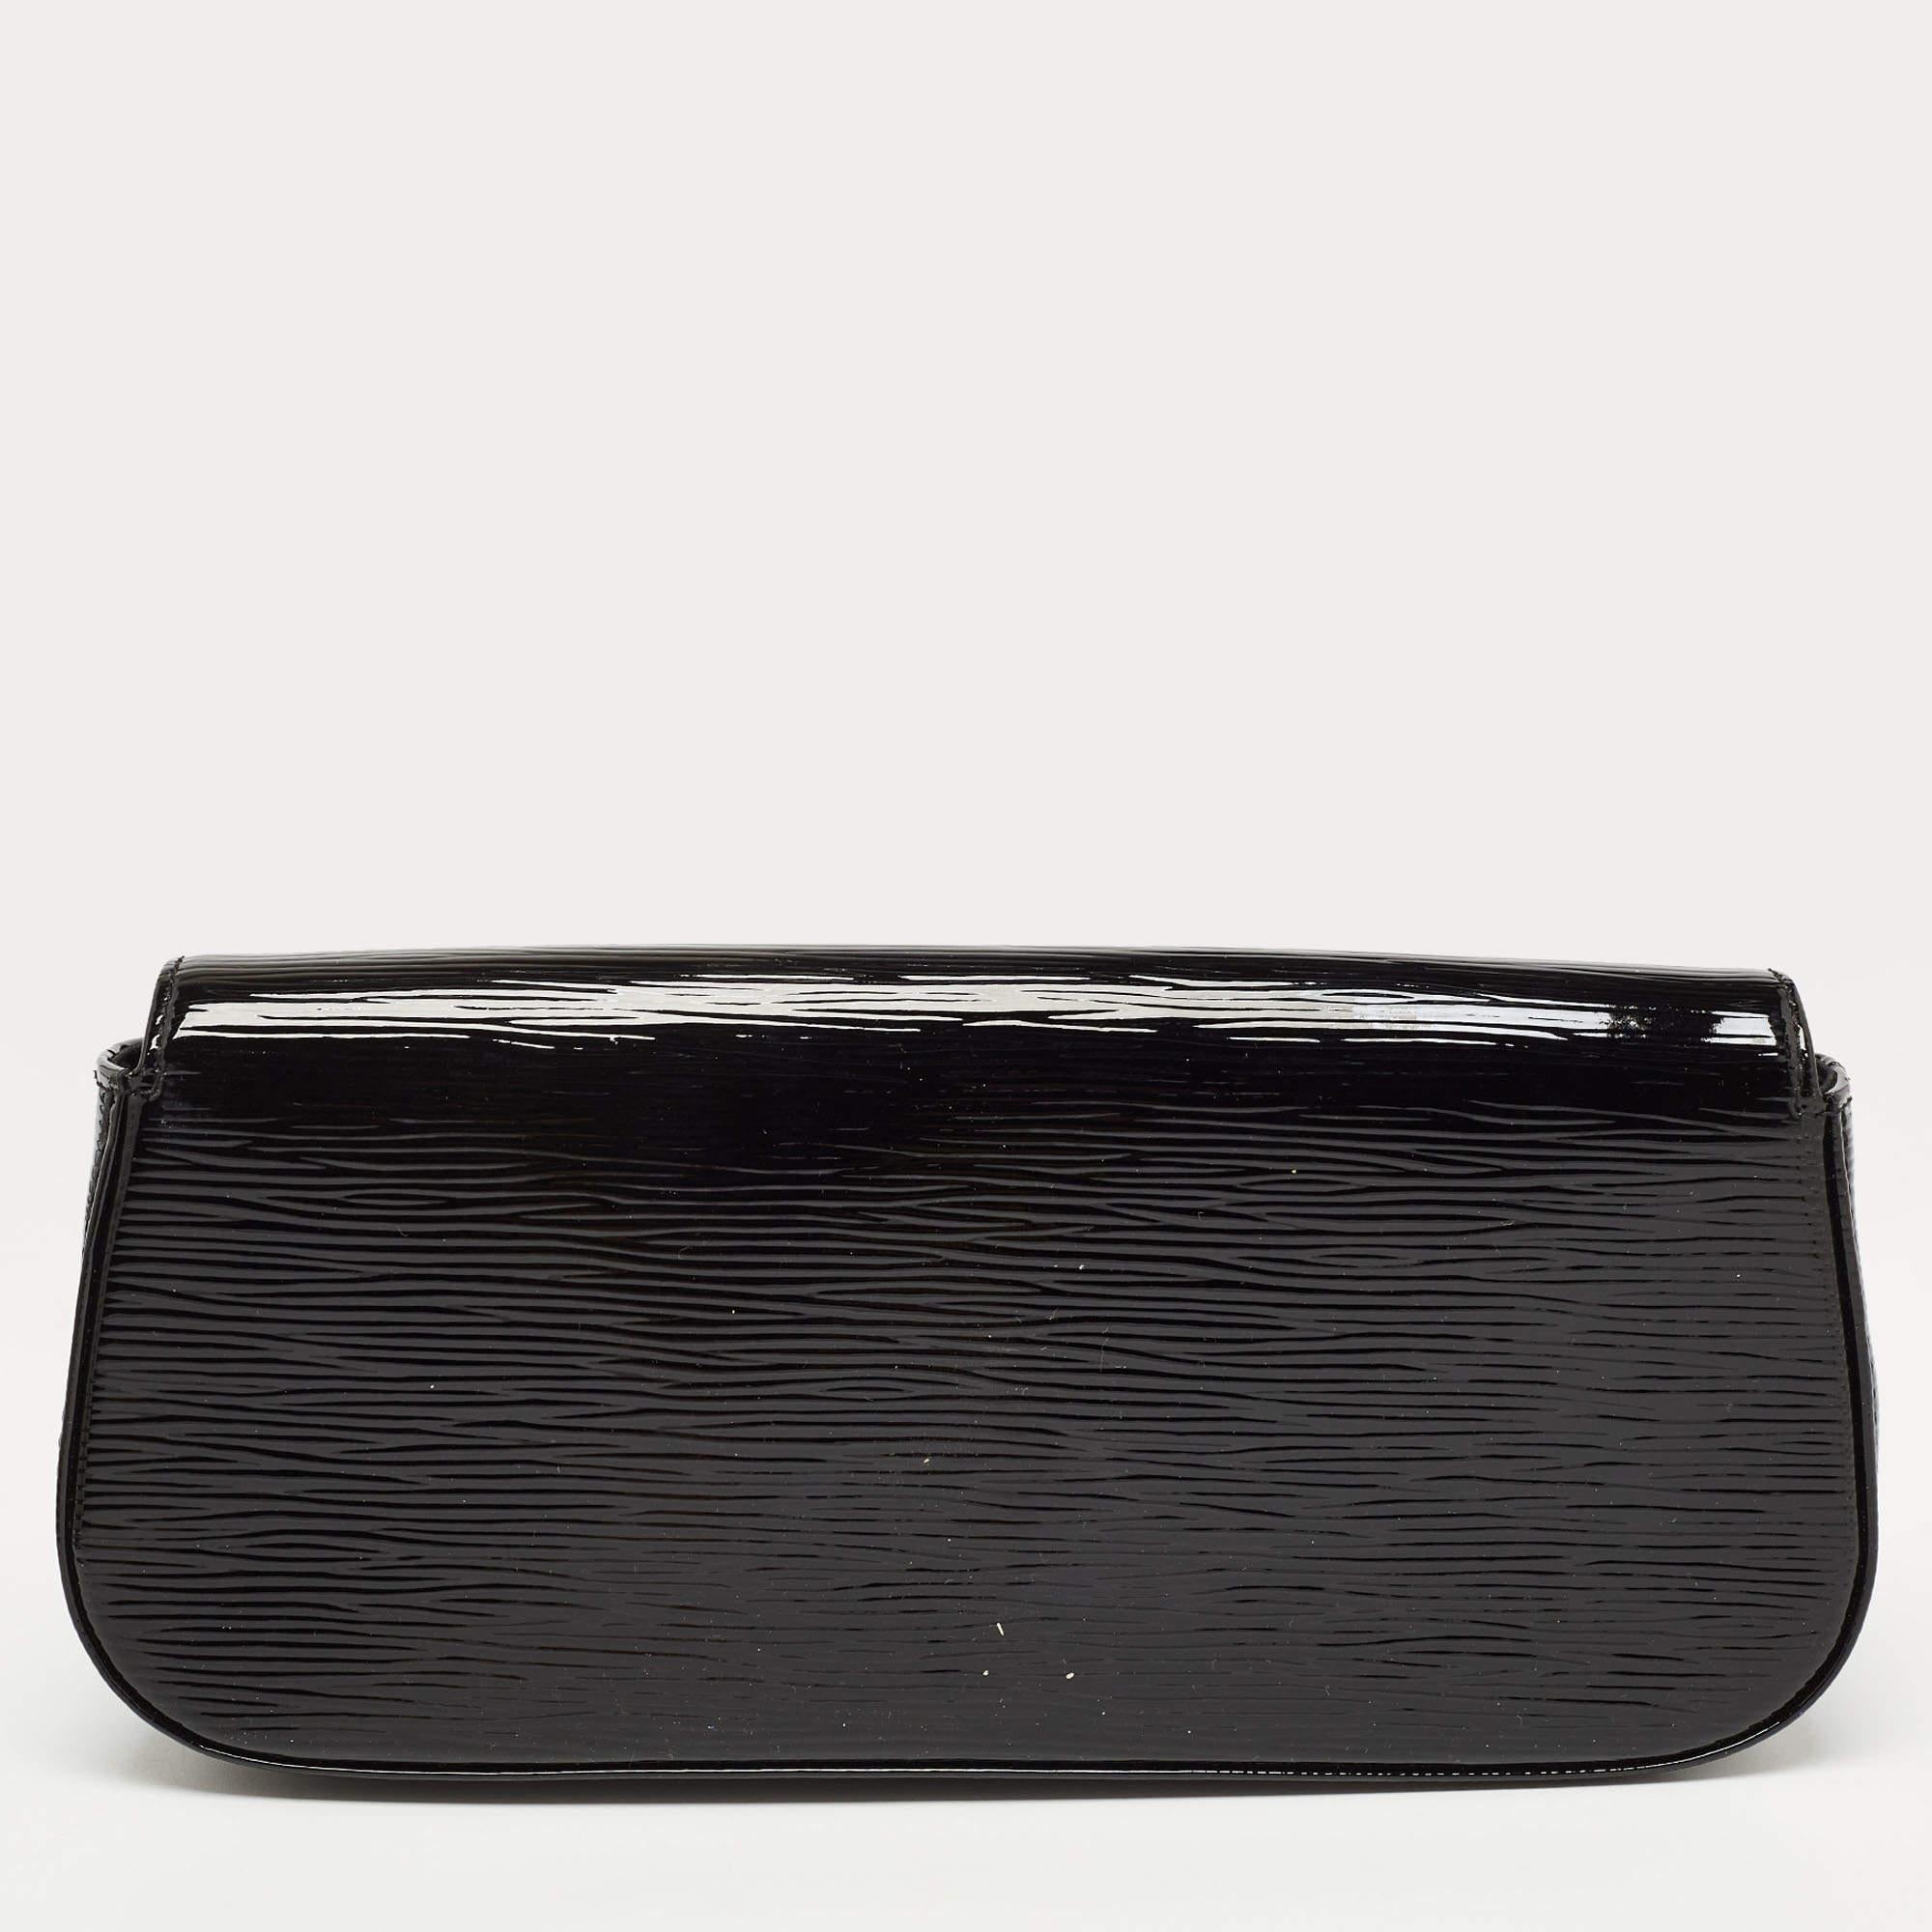 Crafted from quality materials, your wardrobe is missing out on this beautifully made designer clutch. Look your fashionable best in any outfit with this stylish clutch that promises to elevate your ensemble.

Includes: Original Dustbag, Original